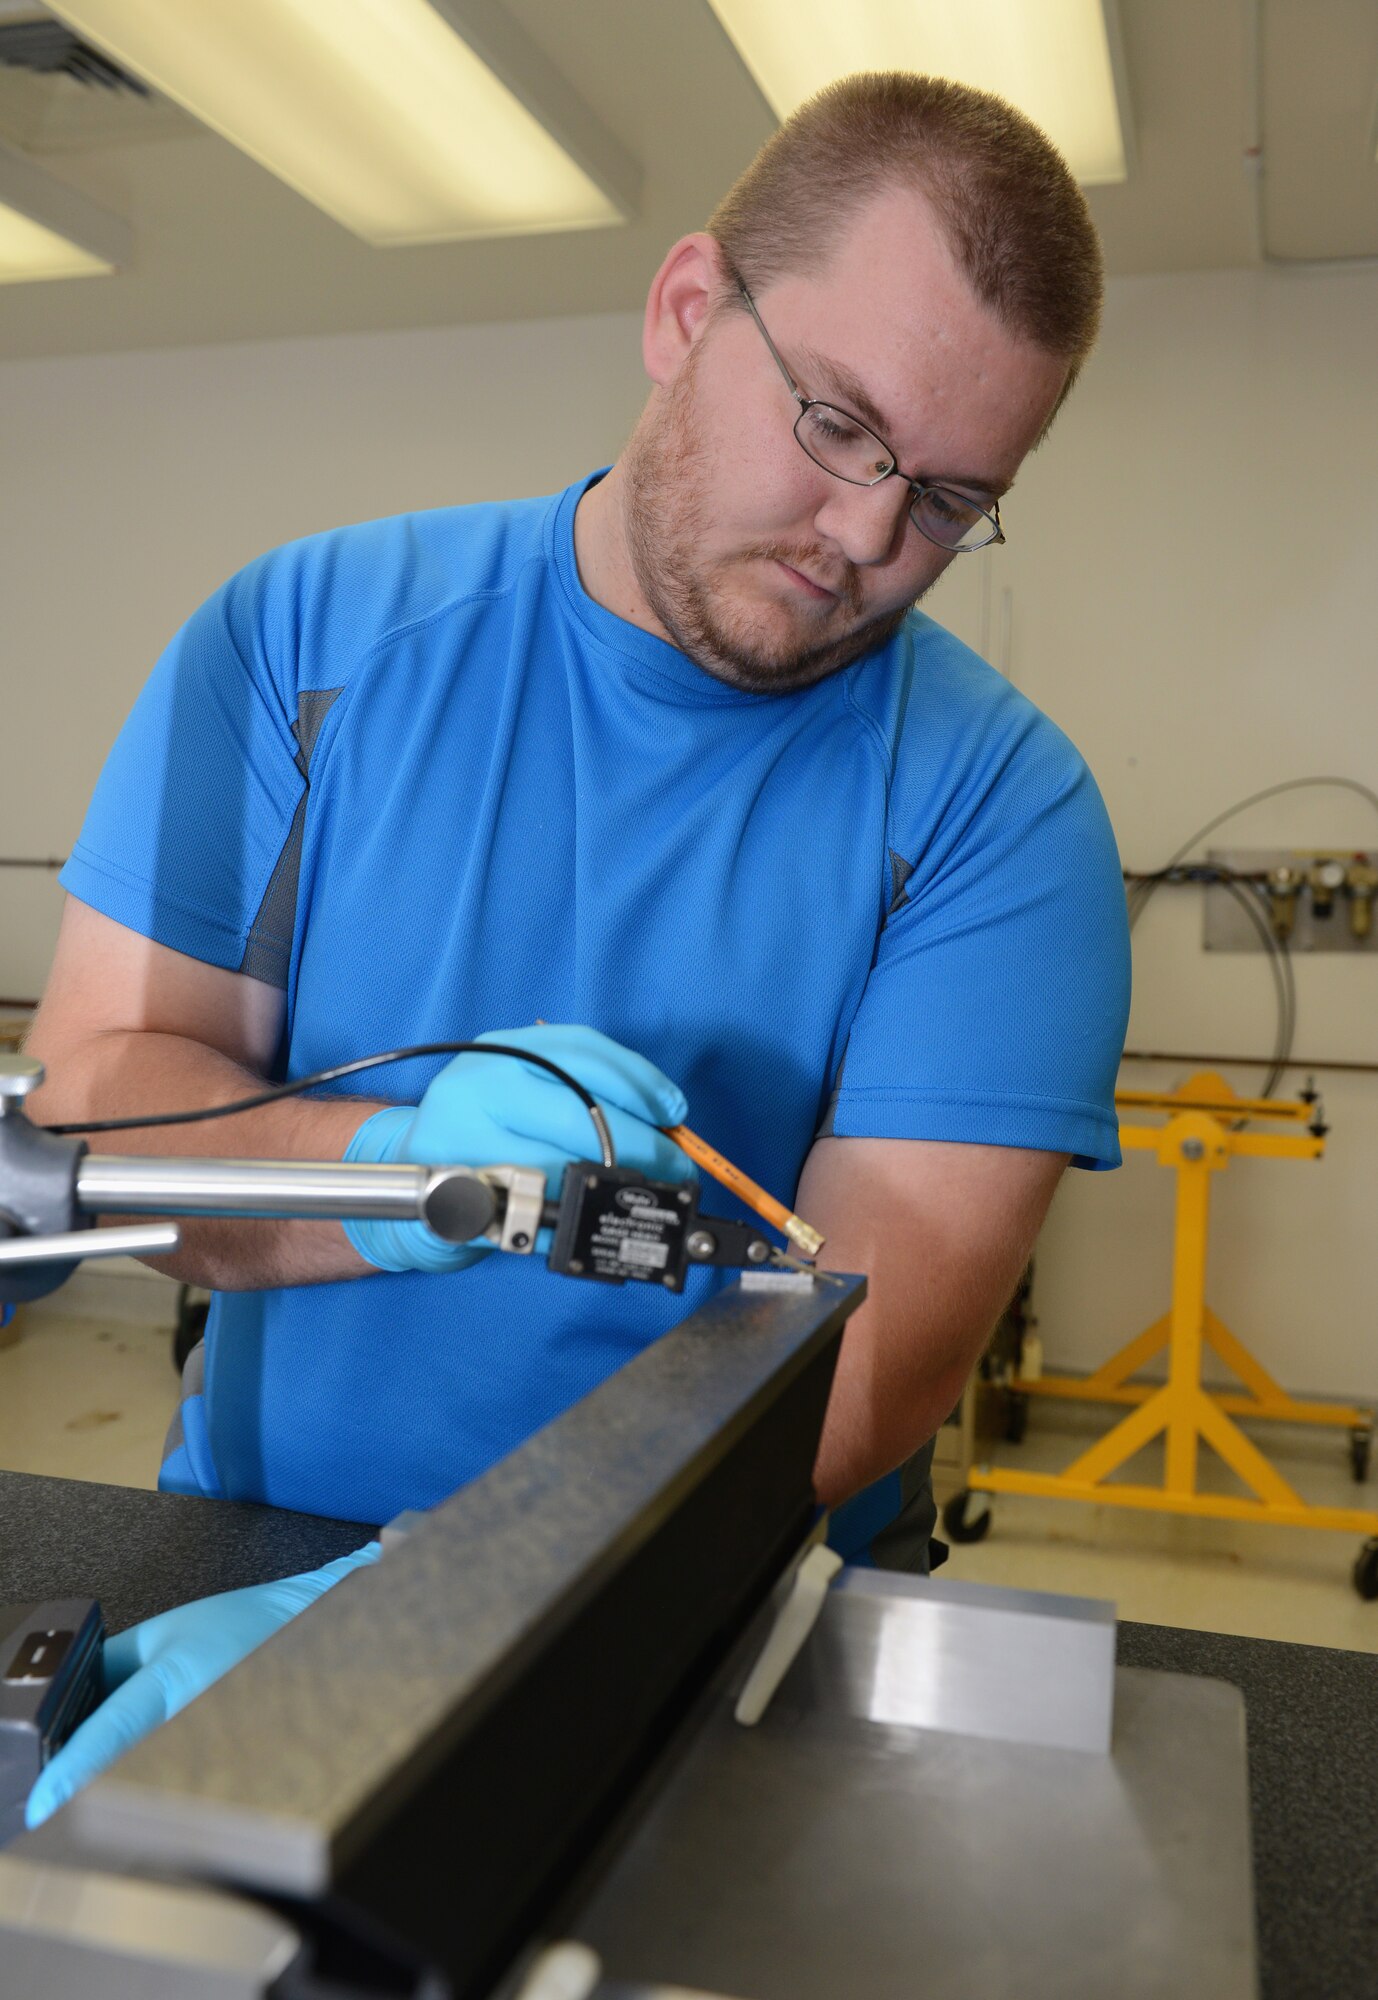 Elijah Bacchus, 36th Maintenance Squadron Precision Measurement Equipment Laboratory technician, calibrates the flatness of the base of a master level June 19, 2015, at Andersen Air Force Base, Guam. PMEL technicians calibrate anything from scales, digital voltmeters and generators to provide reliable equipment for the units they support.  (U.S. Air Force photo by Airman 1st Class Arielle Vasquez/Released)